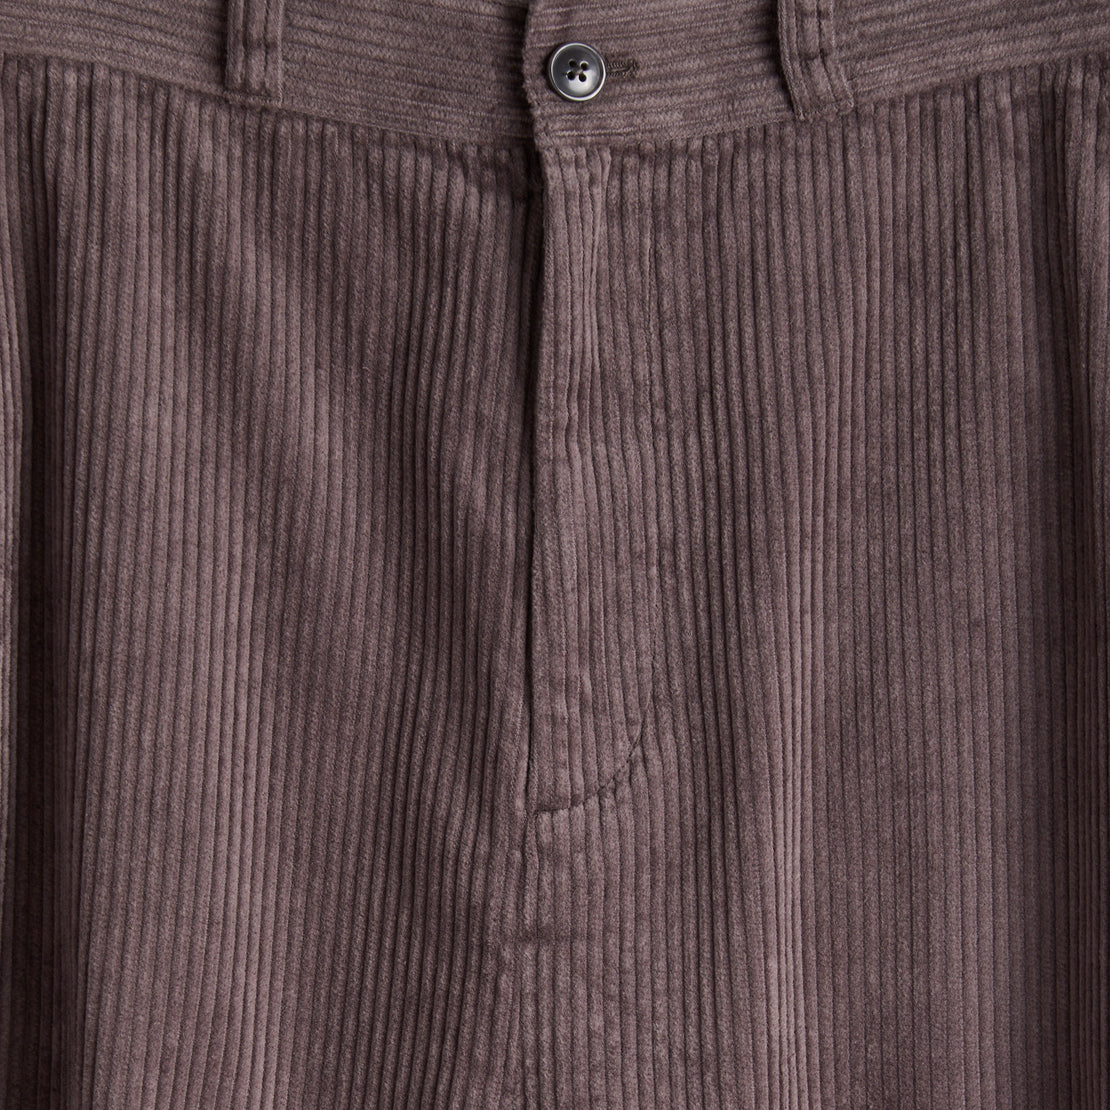 5 Wale Cropped Corduroy Pant - Charcoal - BEAMS BOY - STAG Provisions - W - Pants - Twill